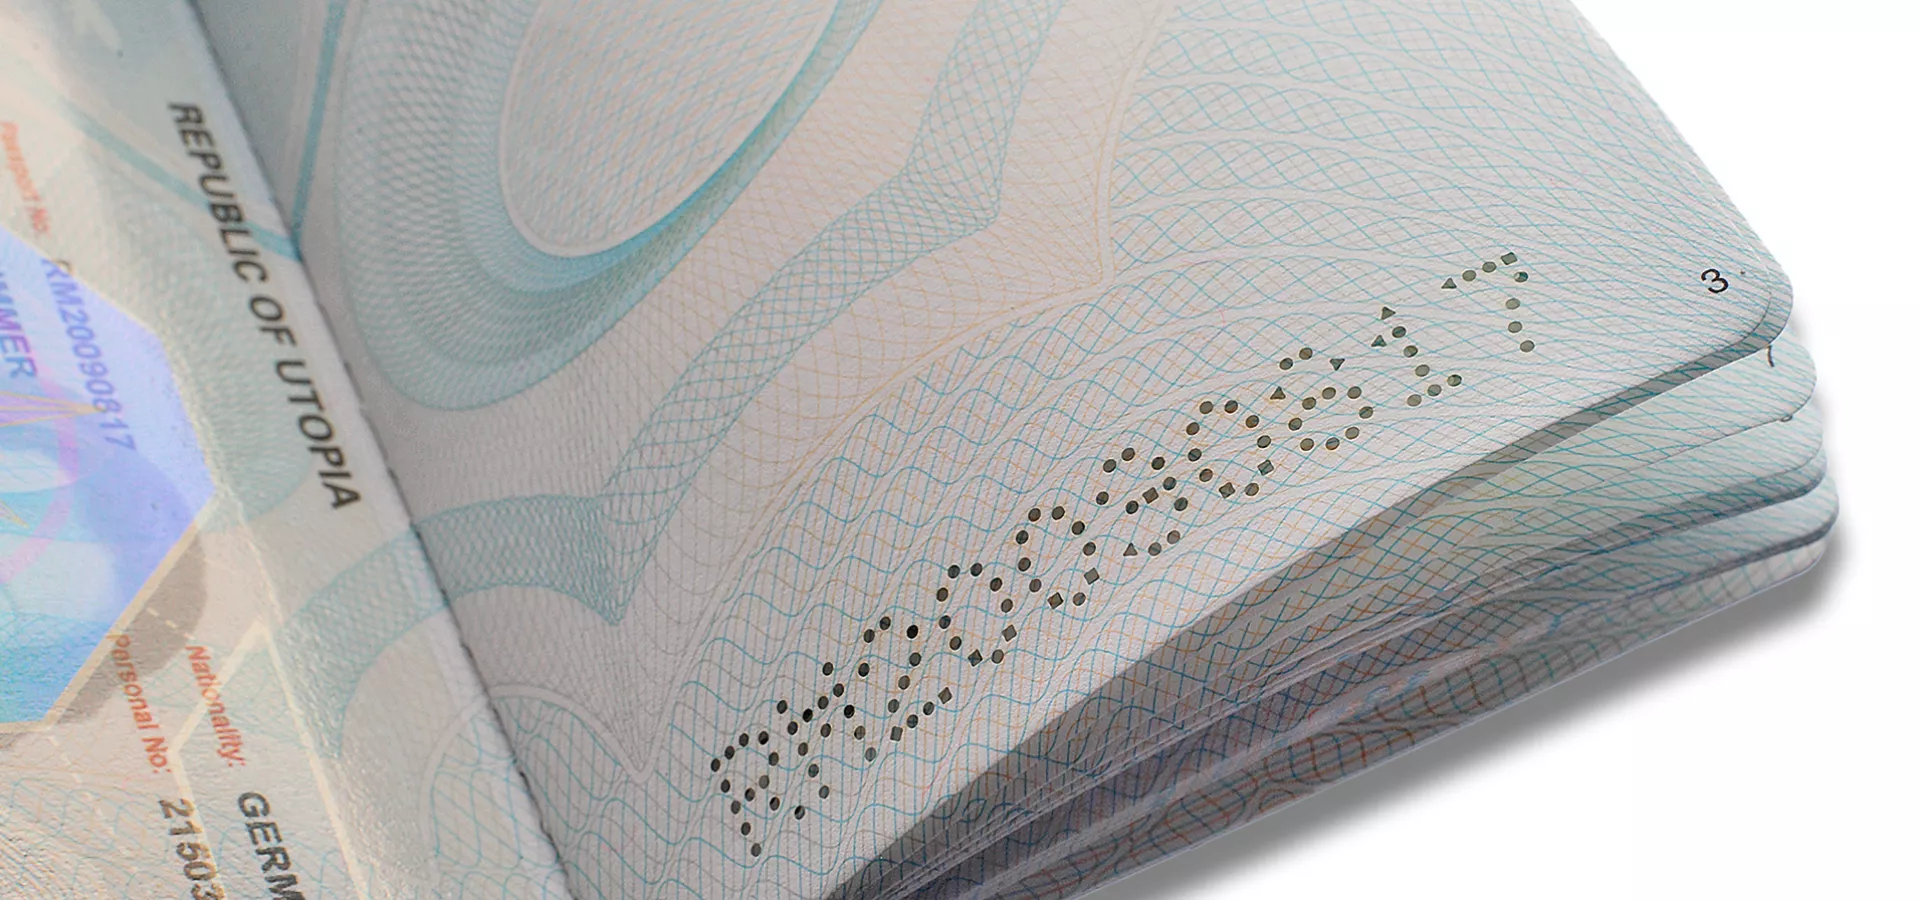 Patented perforation process for your ID documents